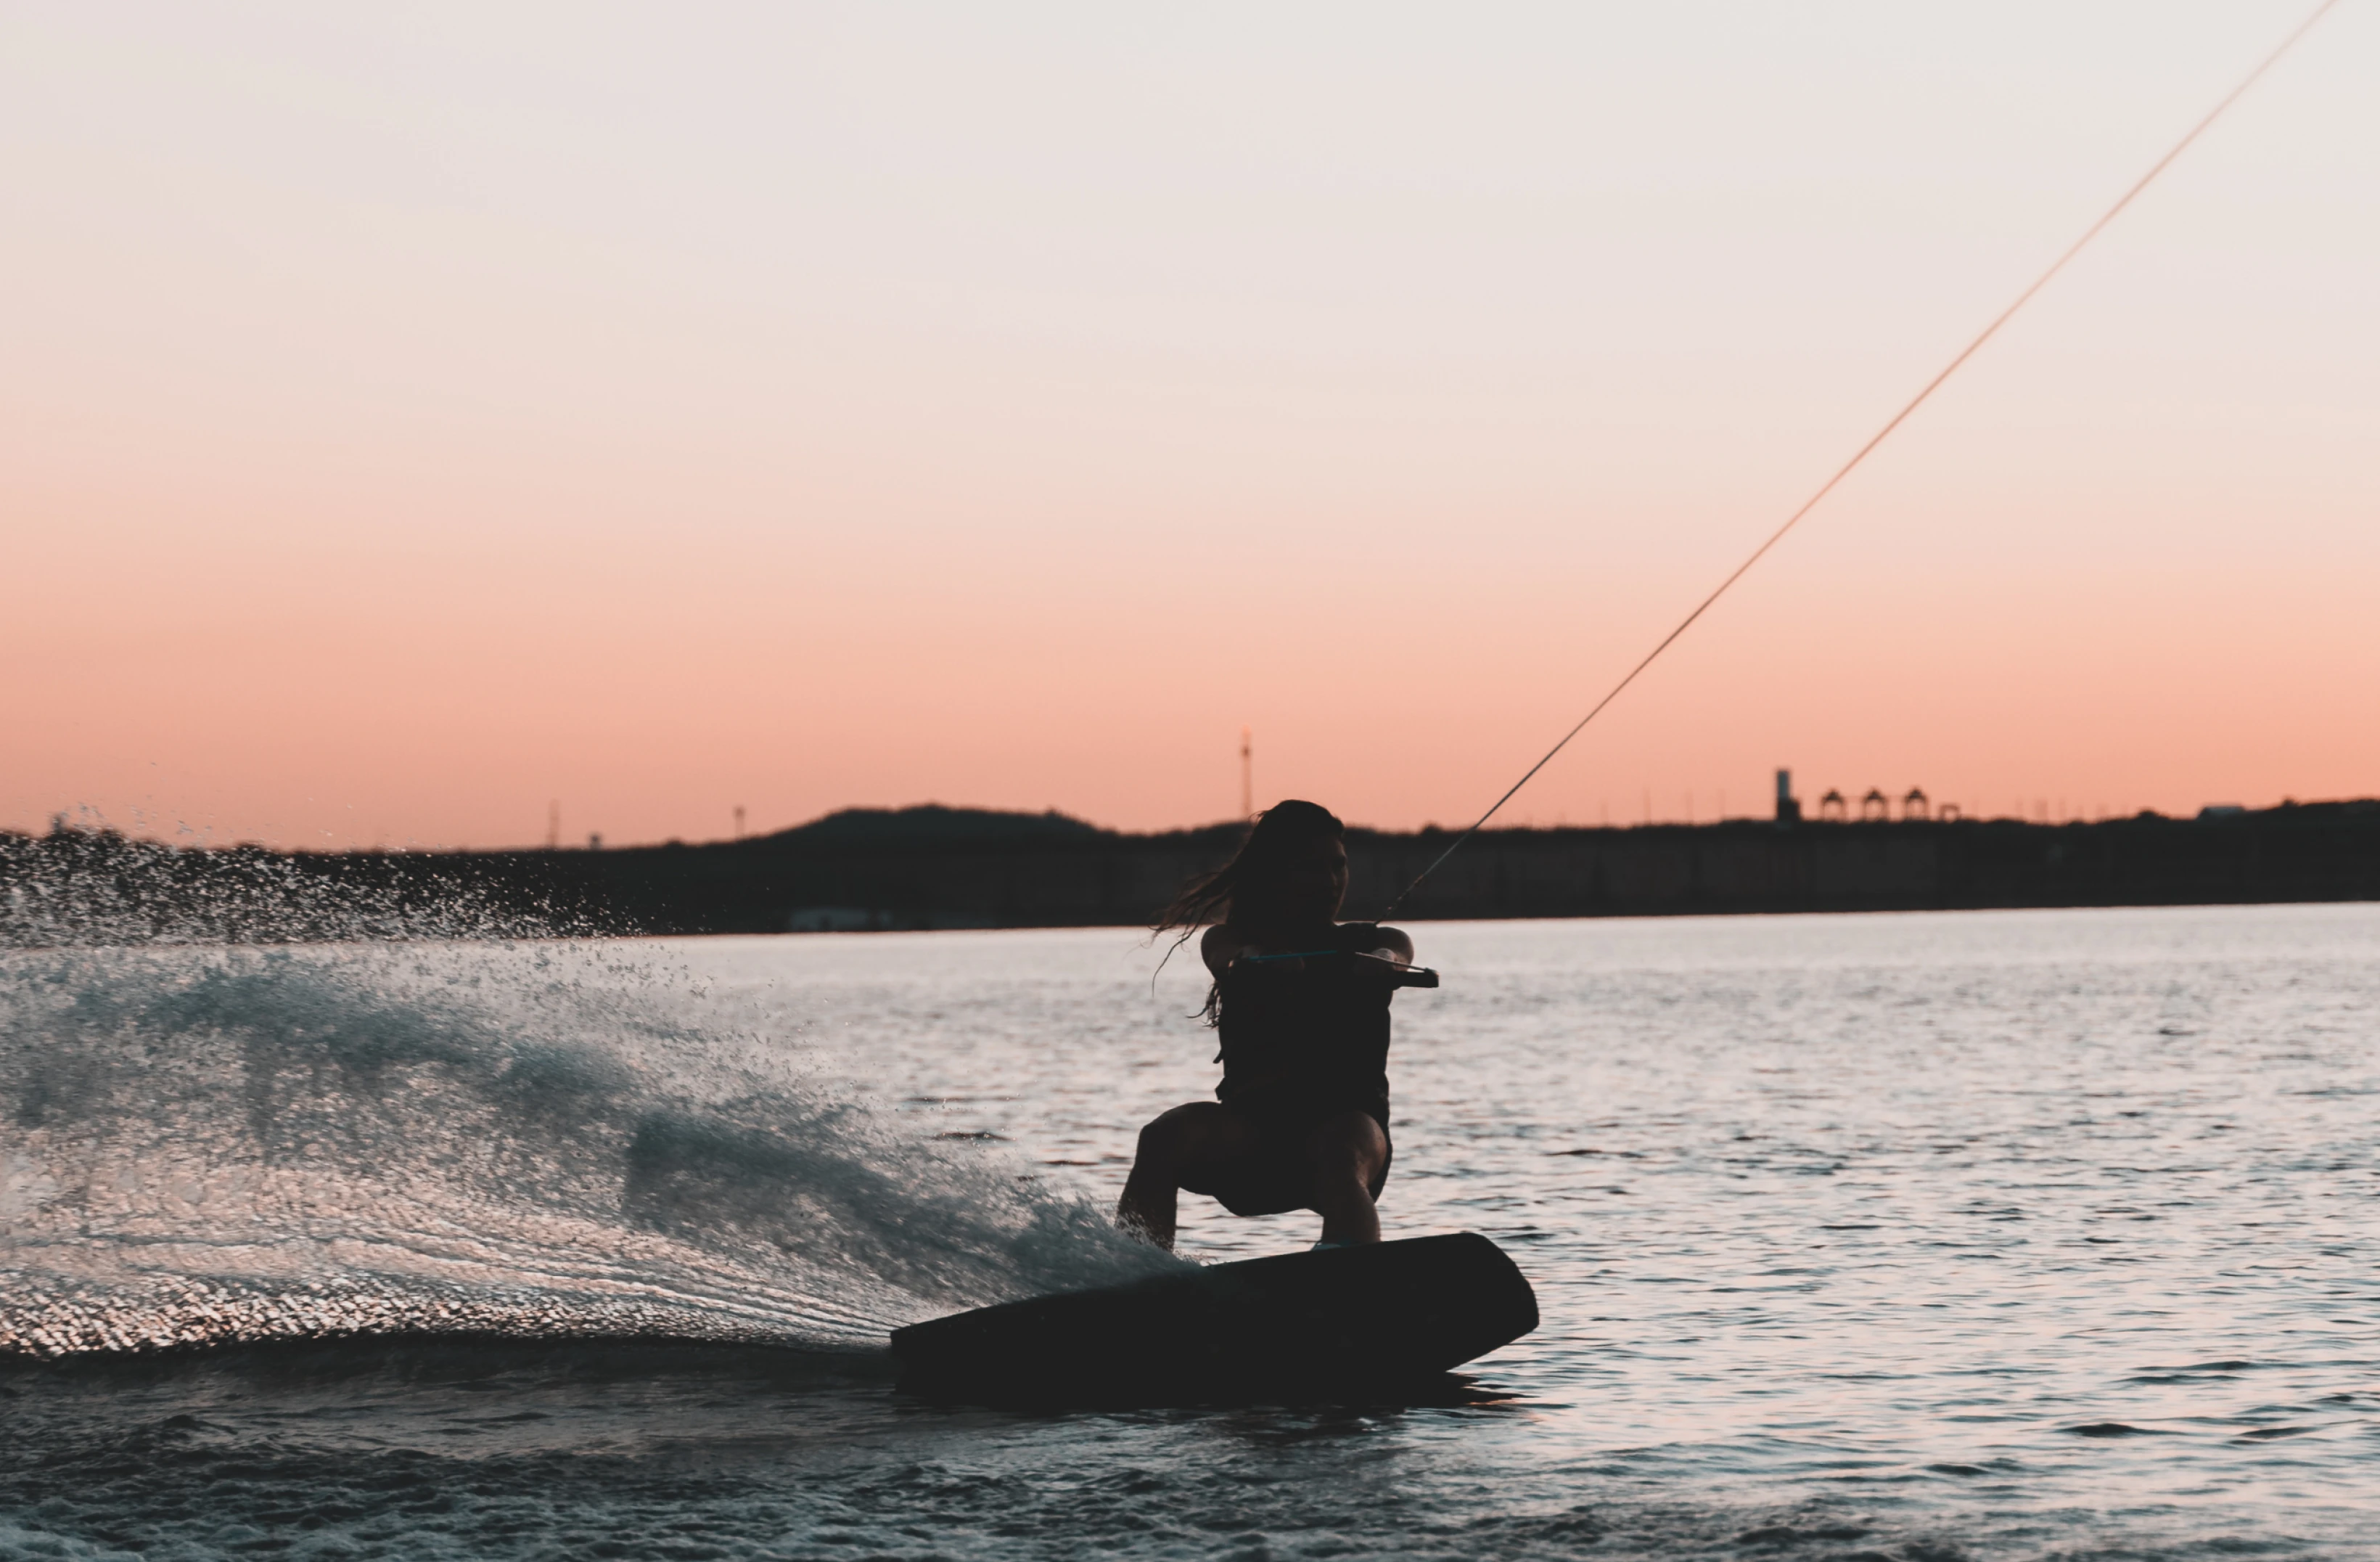 The silhouette of a wake surfer in front of a peach-colored sunset